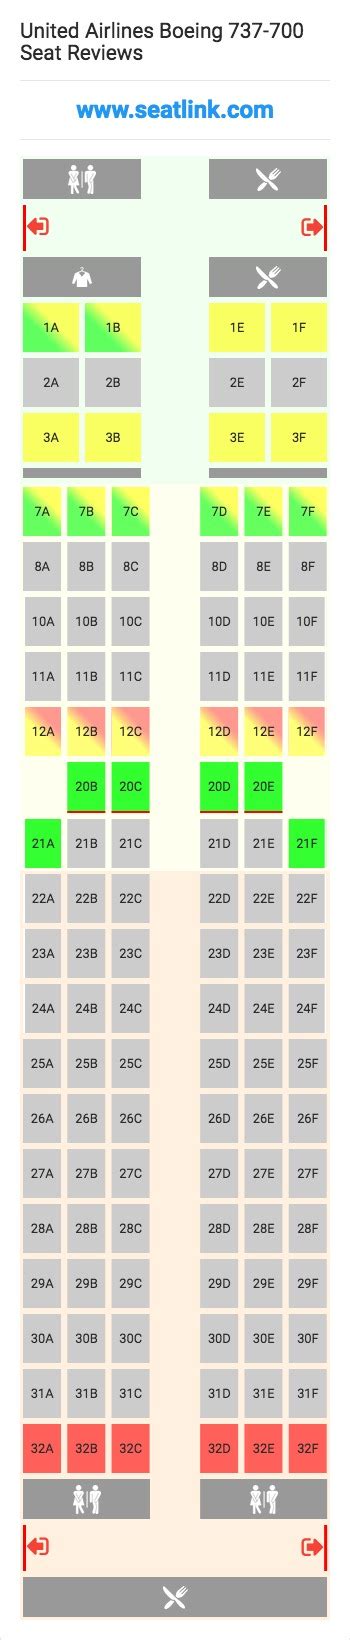 United Airlines 737 Seating